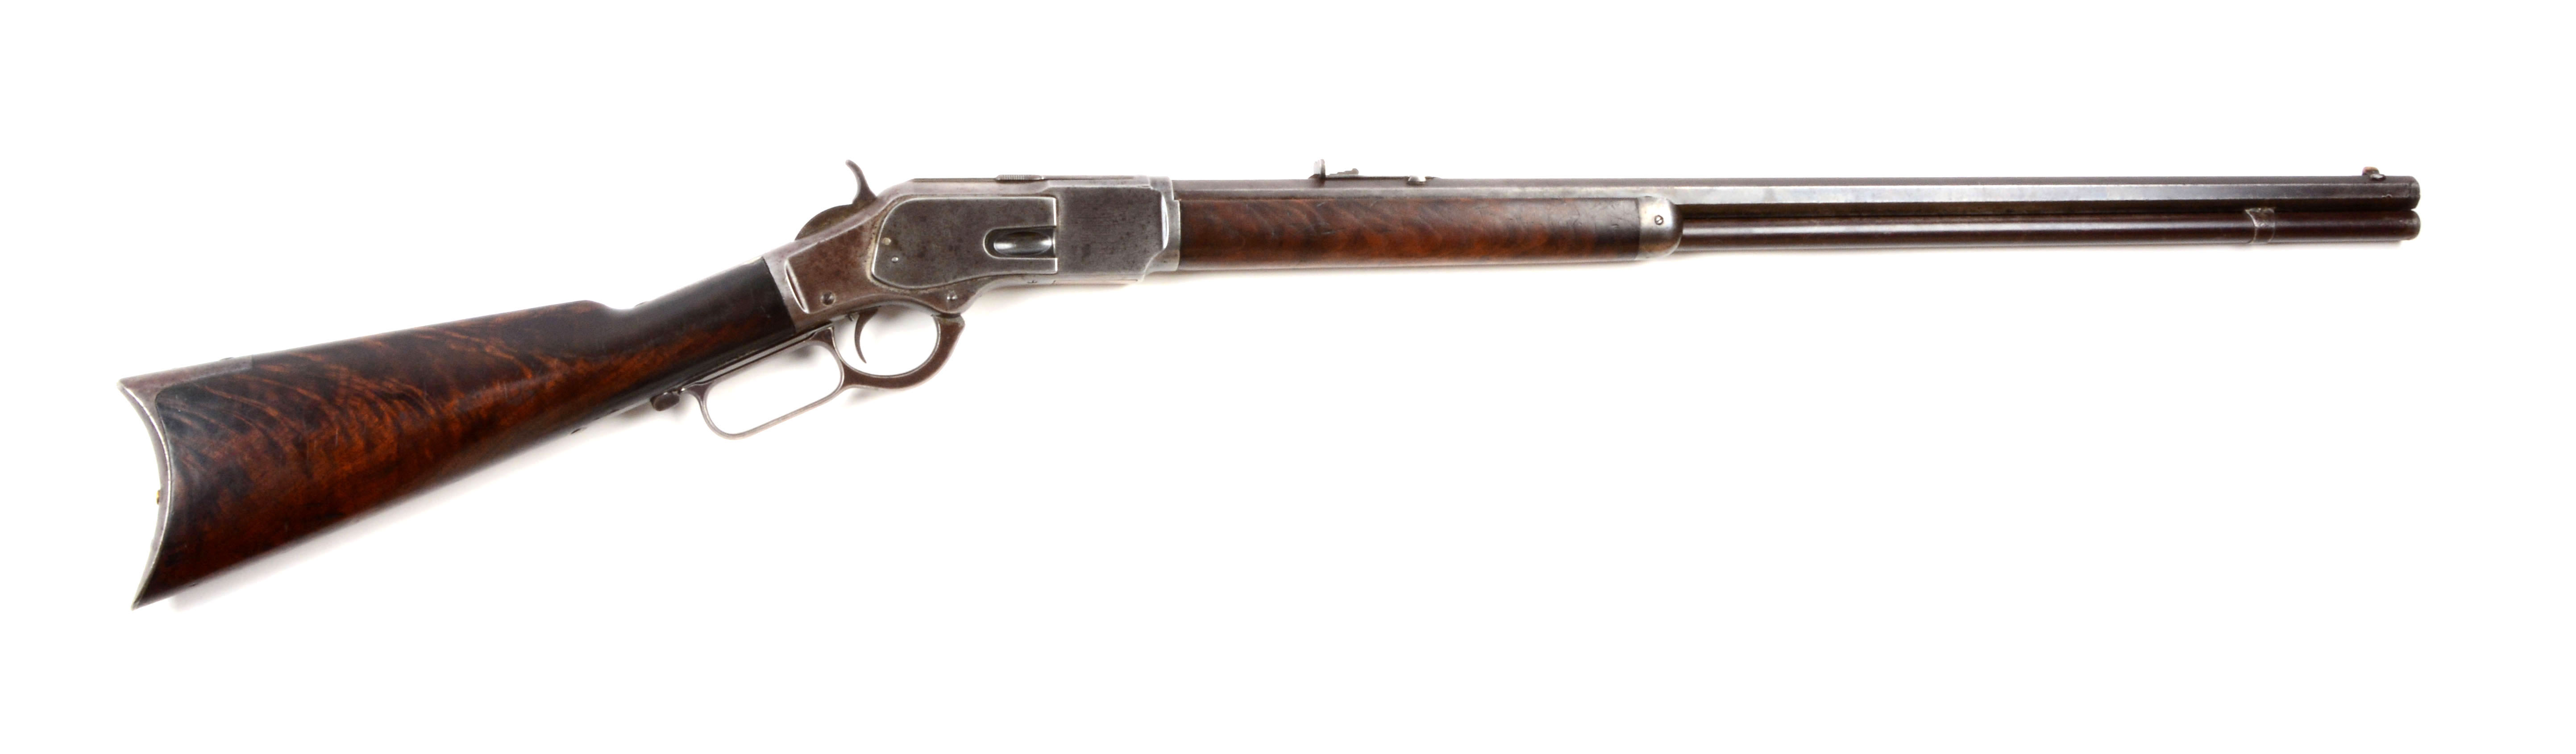 Model 1873 Winchester Inscribed to W.F. Cody, estimated at $40,000-60,000.